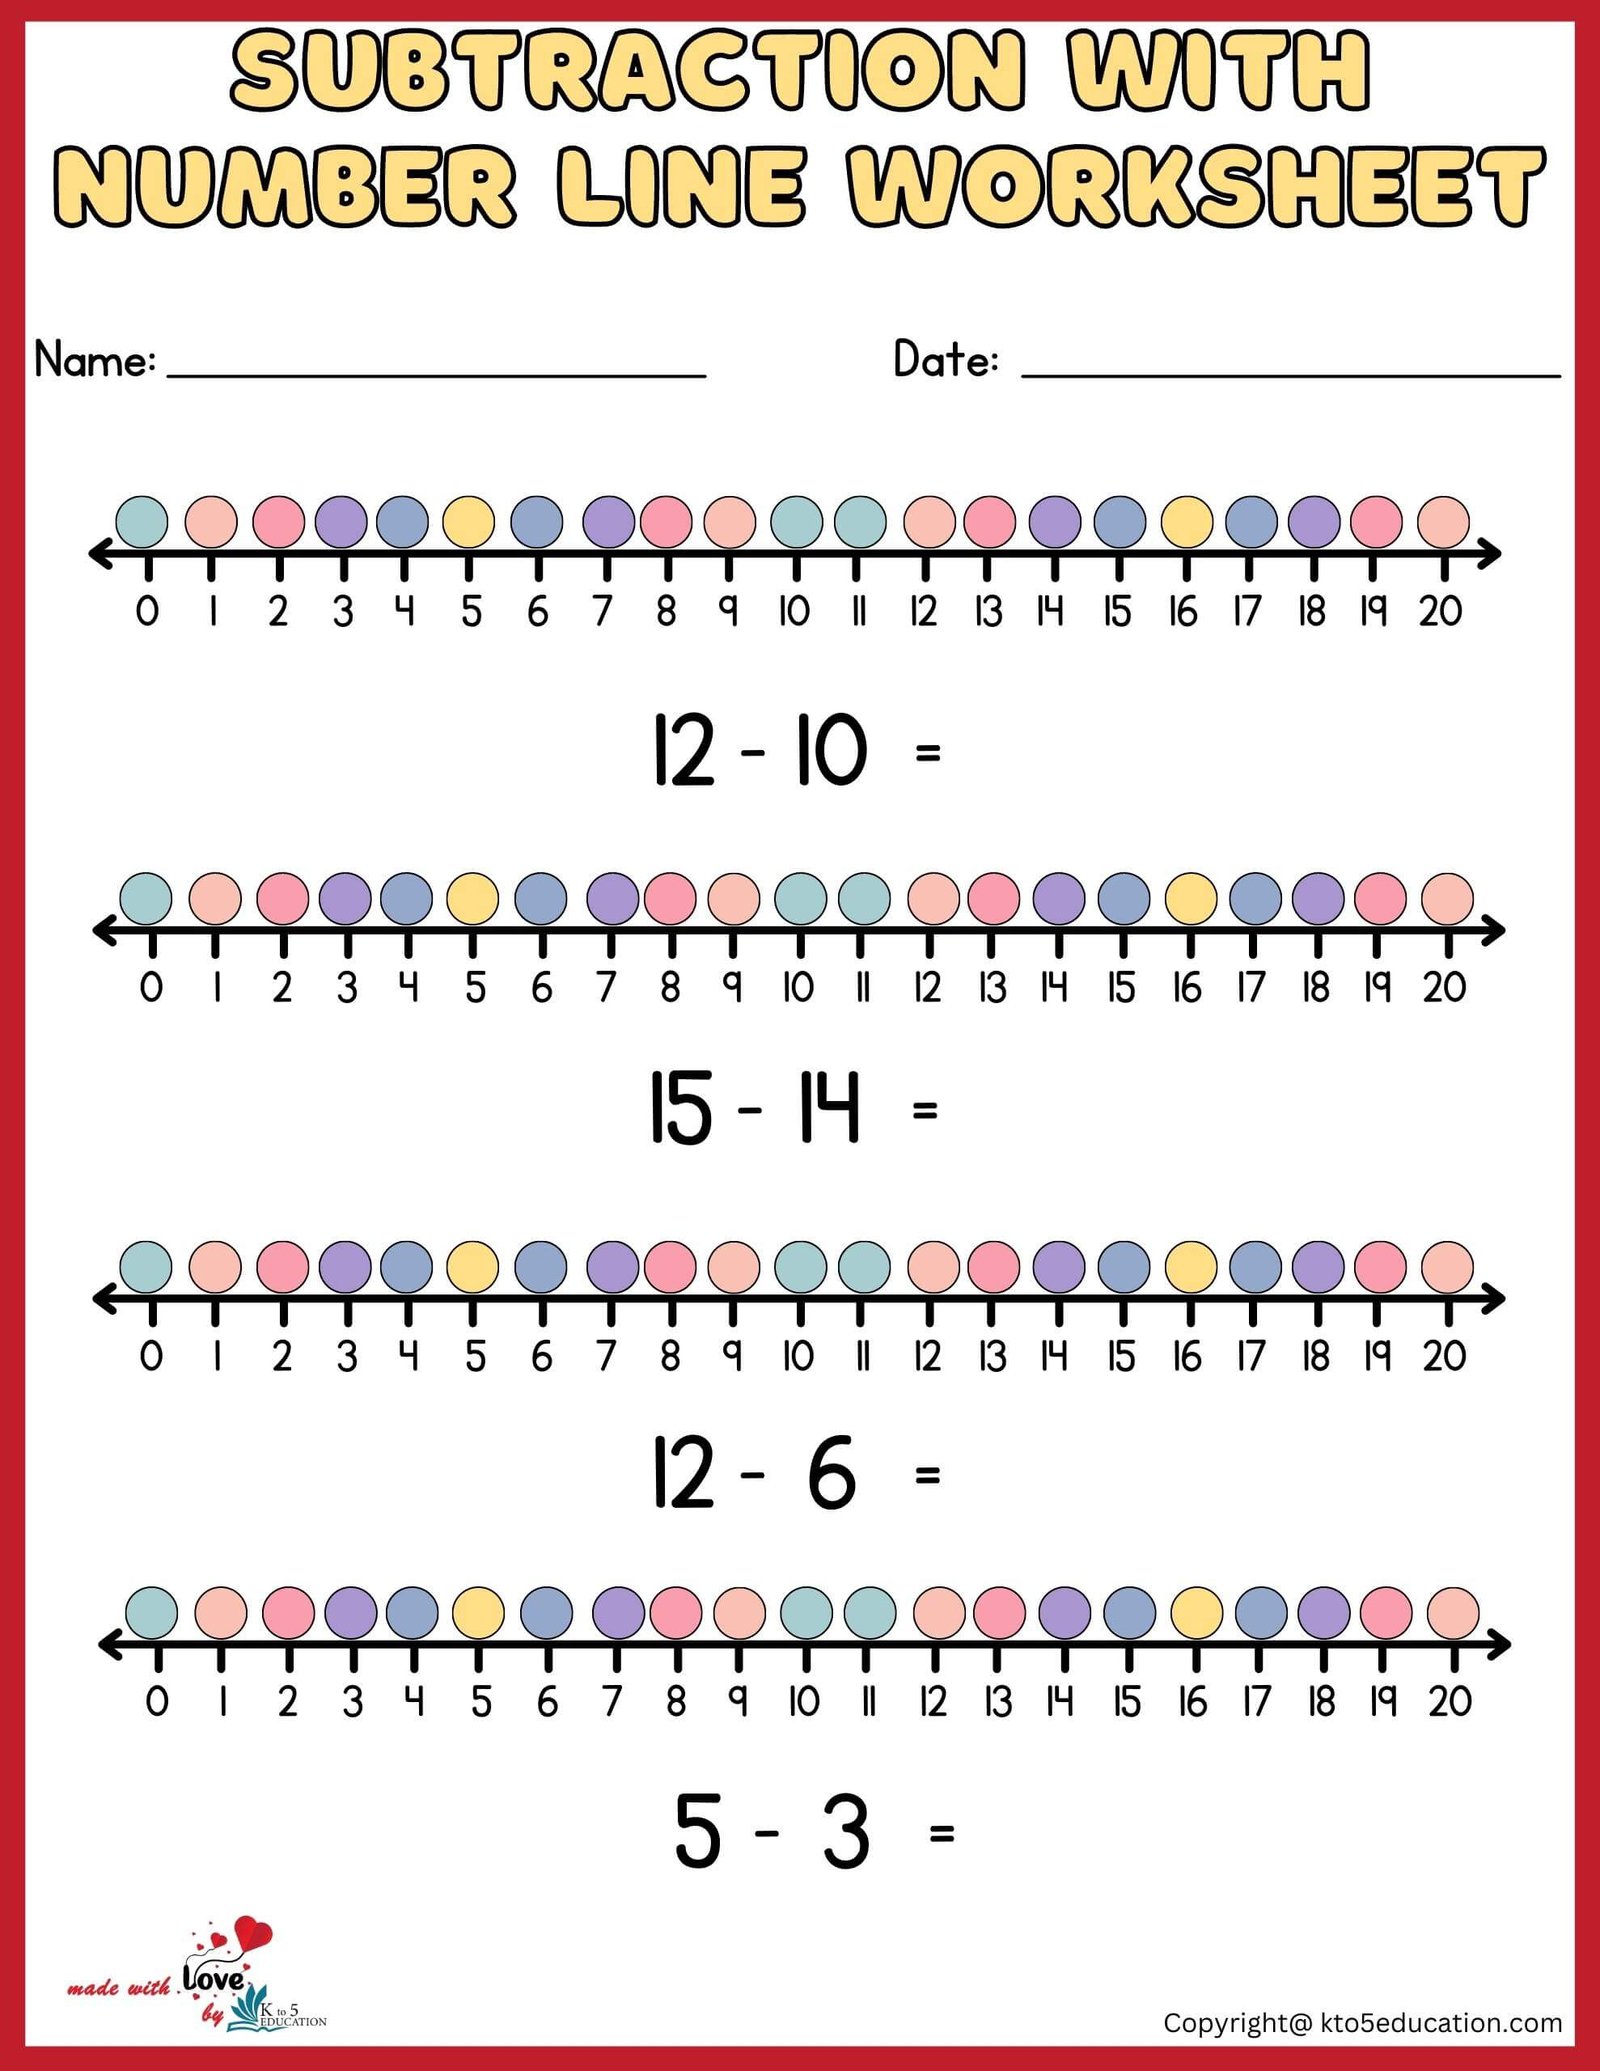 Subtractions With Number Line Worksheets 1-20